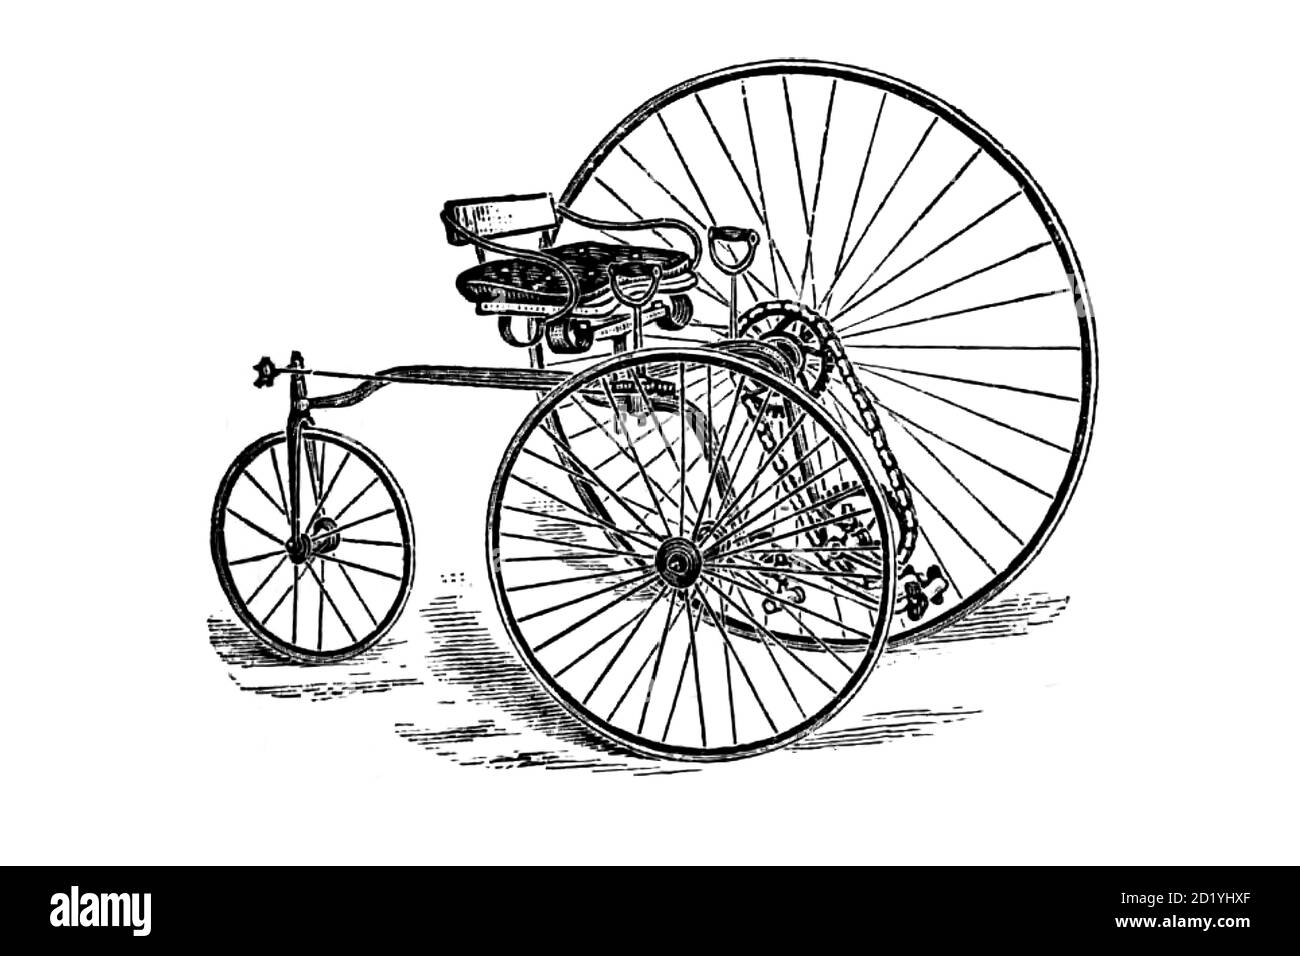 Illustration of an Excelsior Tricycle from The American bicycler: a manual for the observer, the learner, and the expert by Pratt, Charles E. (Charles Eadward), 1845-1898. Publication date 1879. Publisher Boston, Houghton, Osgood and company Stock Photo